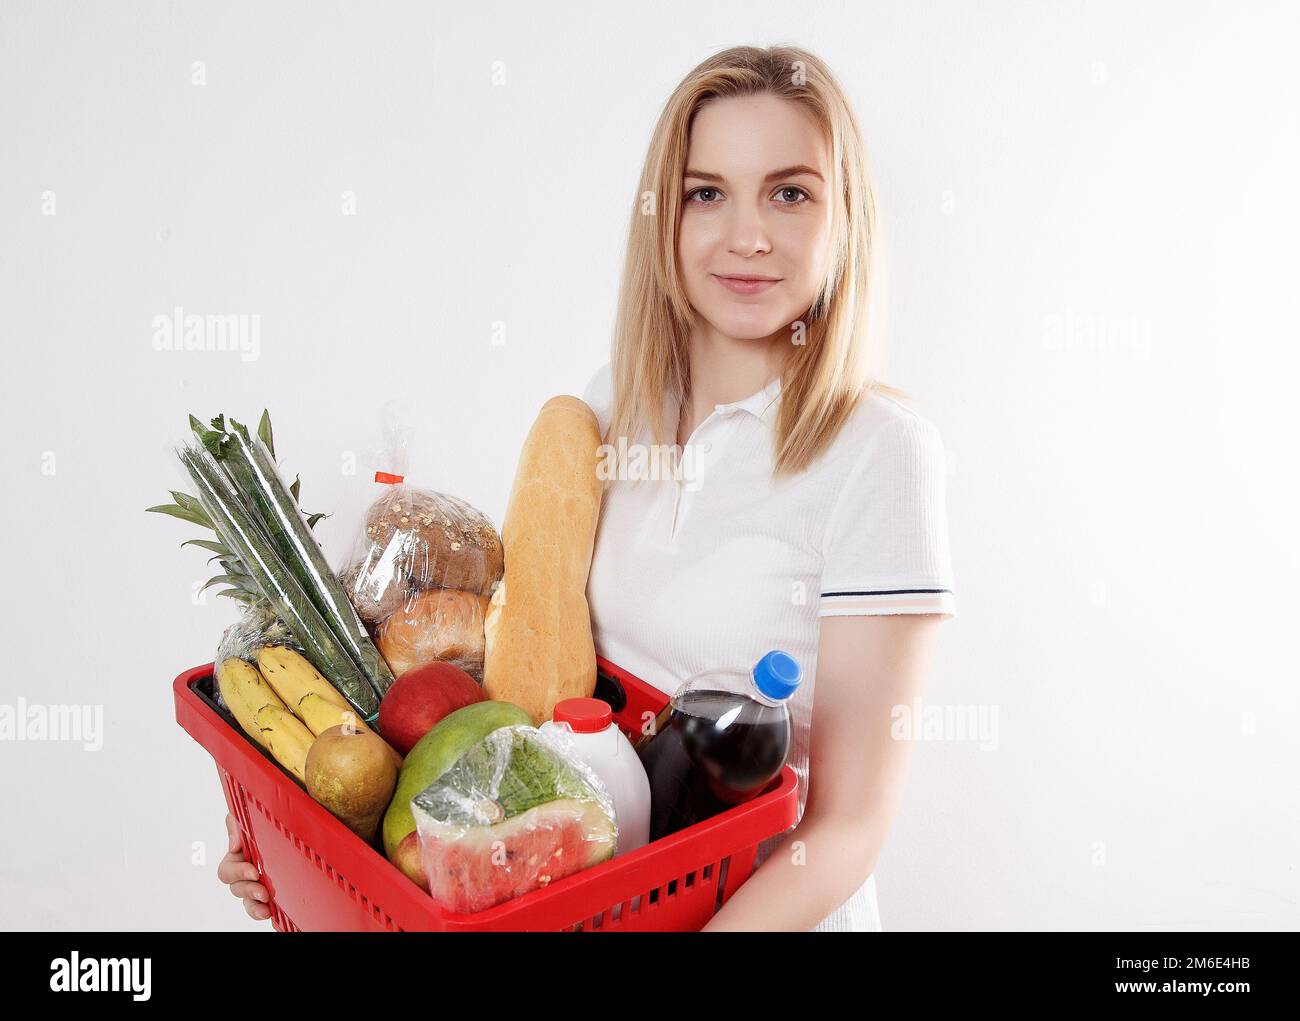 Young woman with goods in basket. Girl holding a basket of groceries. Vegetables, fruits, cookies, milk in the grocery basket. Stock Photo